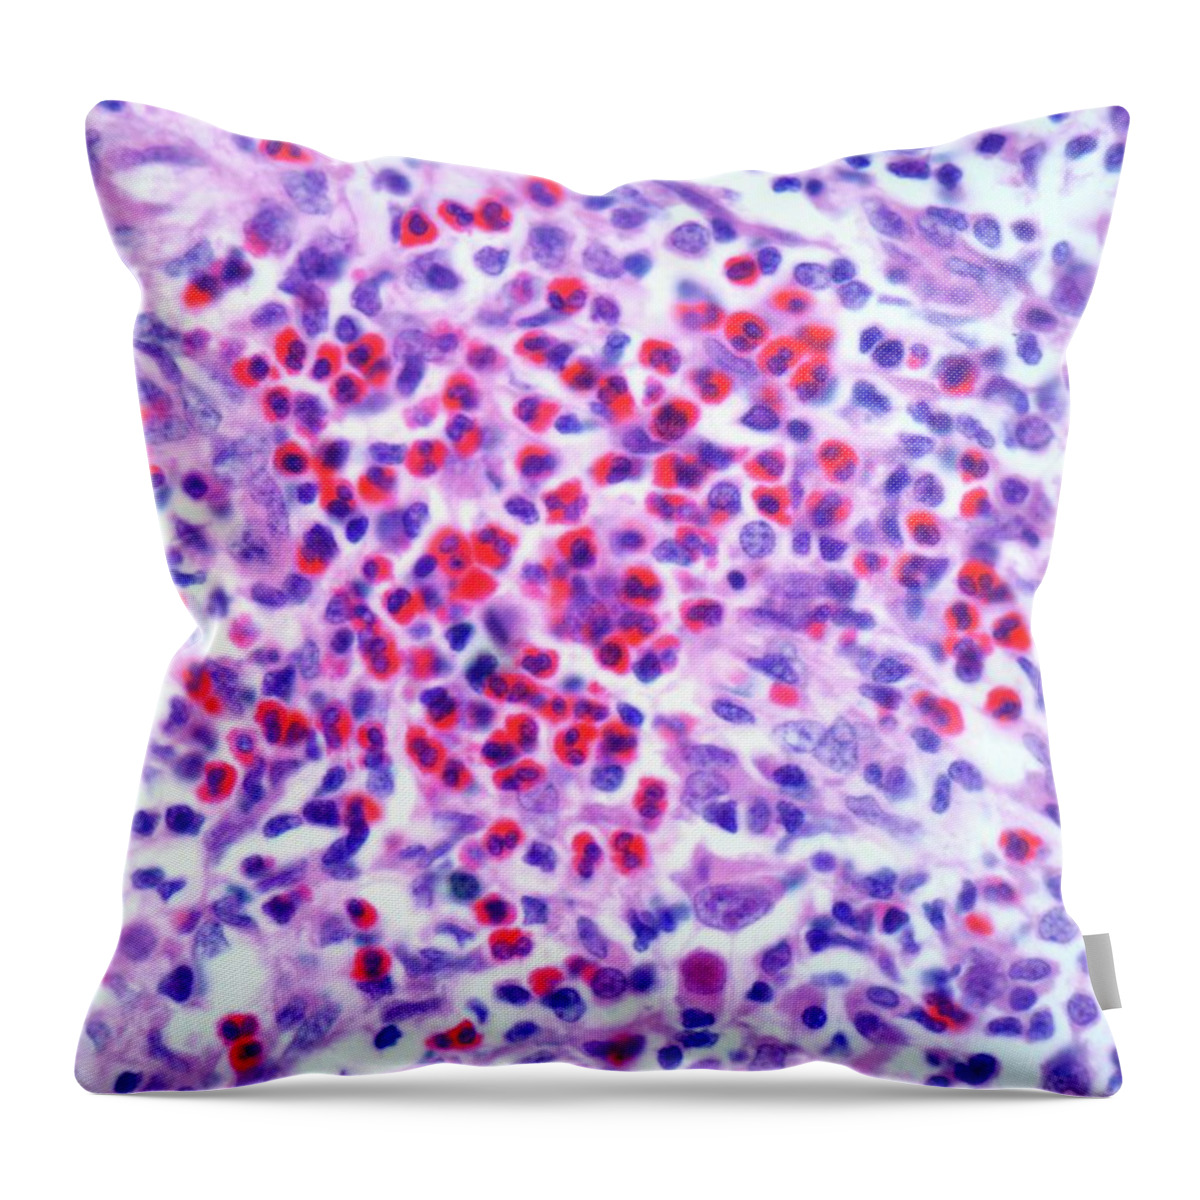 Anatomy Throw Pillow featuring the digital art Hodgkins Lymphoma, Light Micrograph by Science Photo Library - Steve Gschmeissner